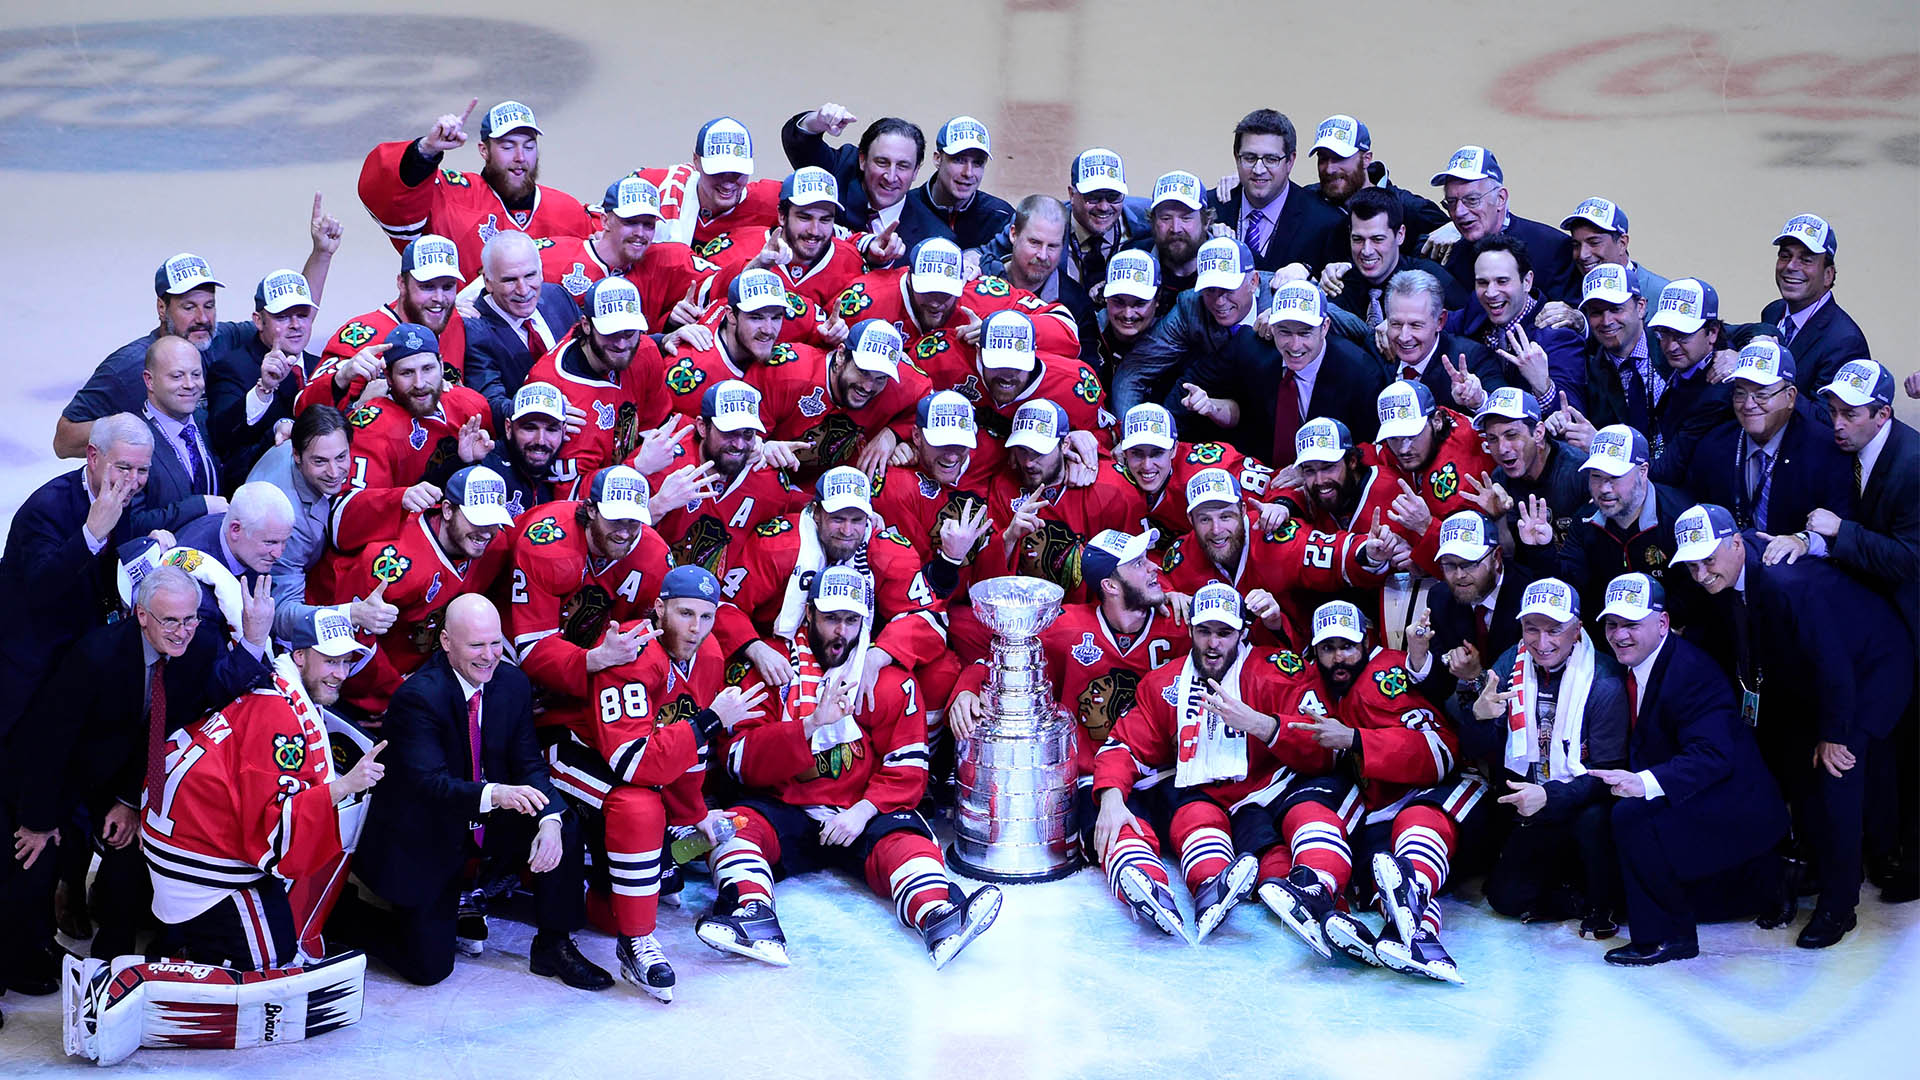 Blackhawks win first Stanley Cup since 1961 - The San Diego Union-Tribune